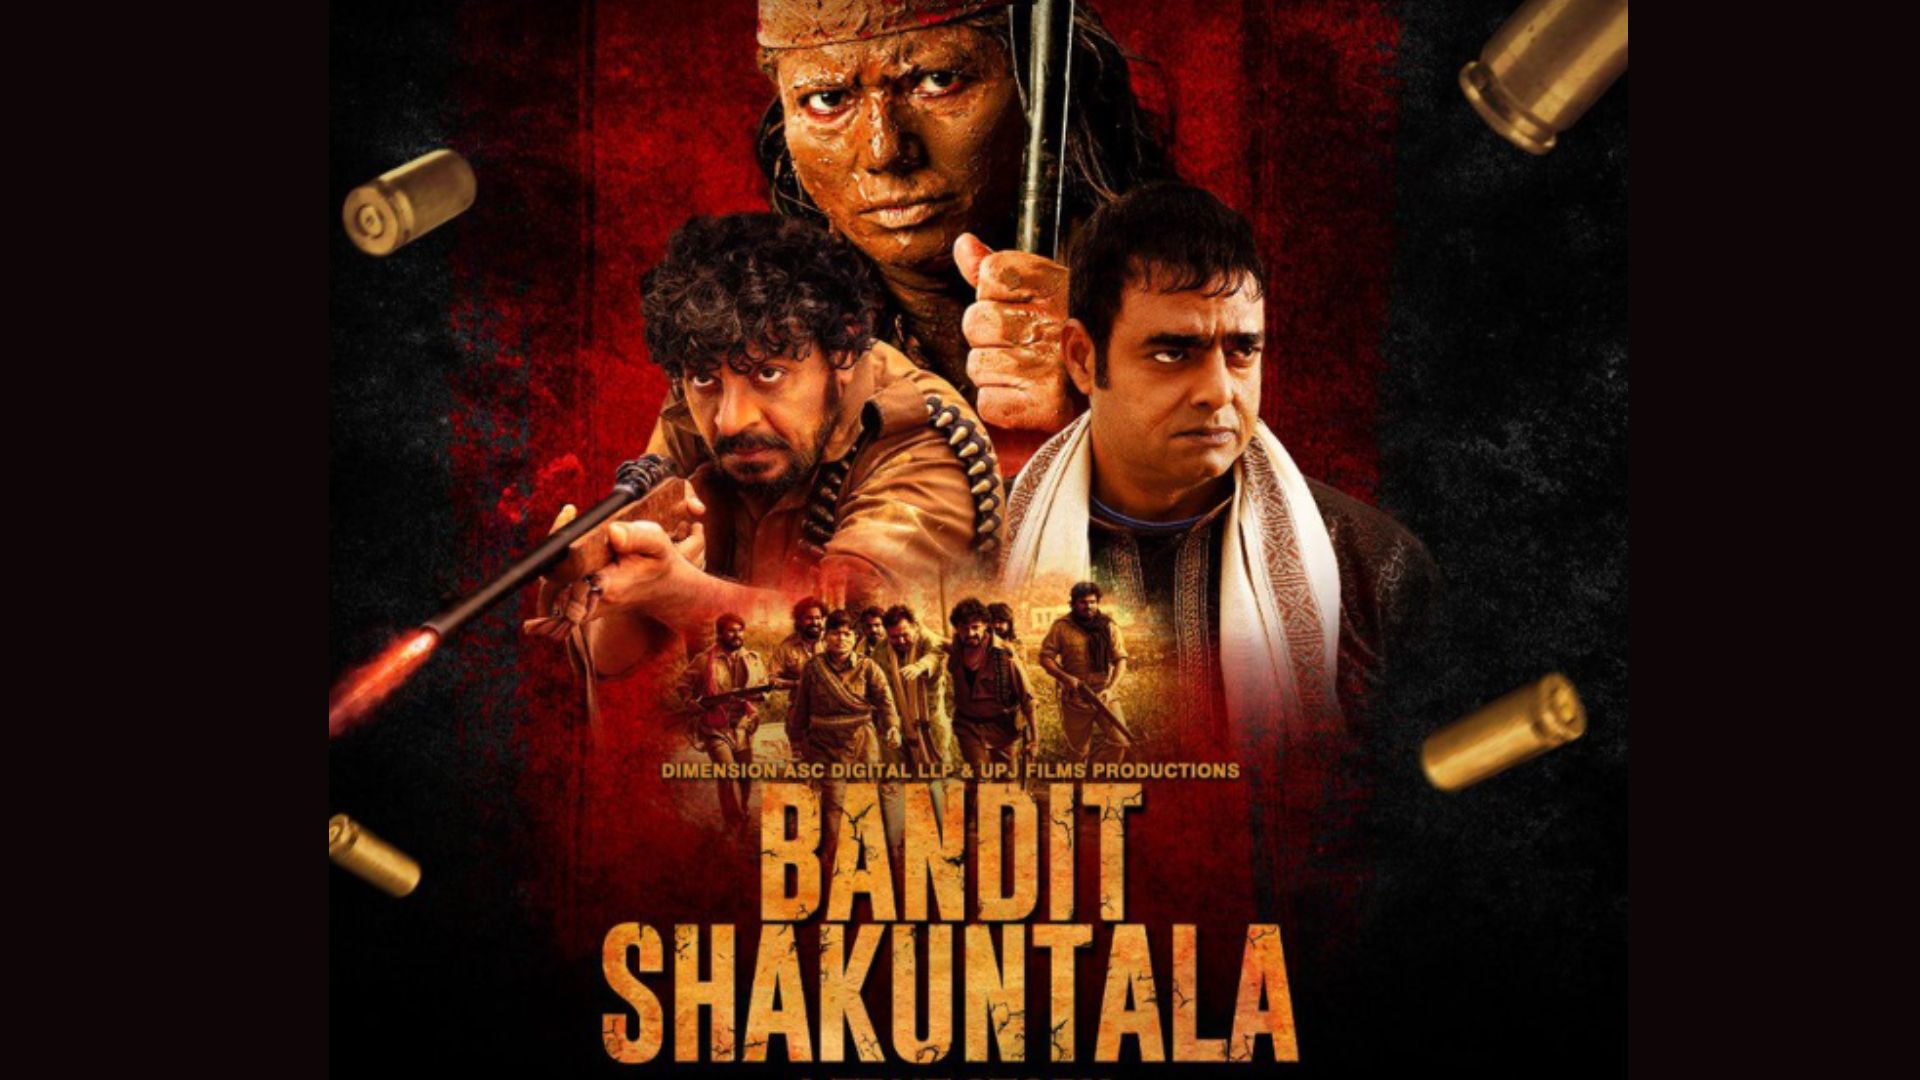 Bandit Shakuntala movie cast, Release date, Director and other detail